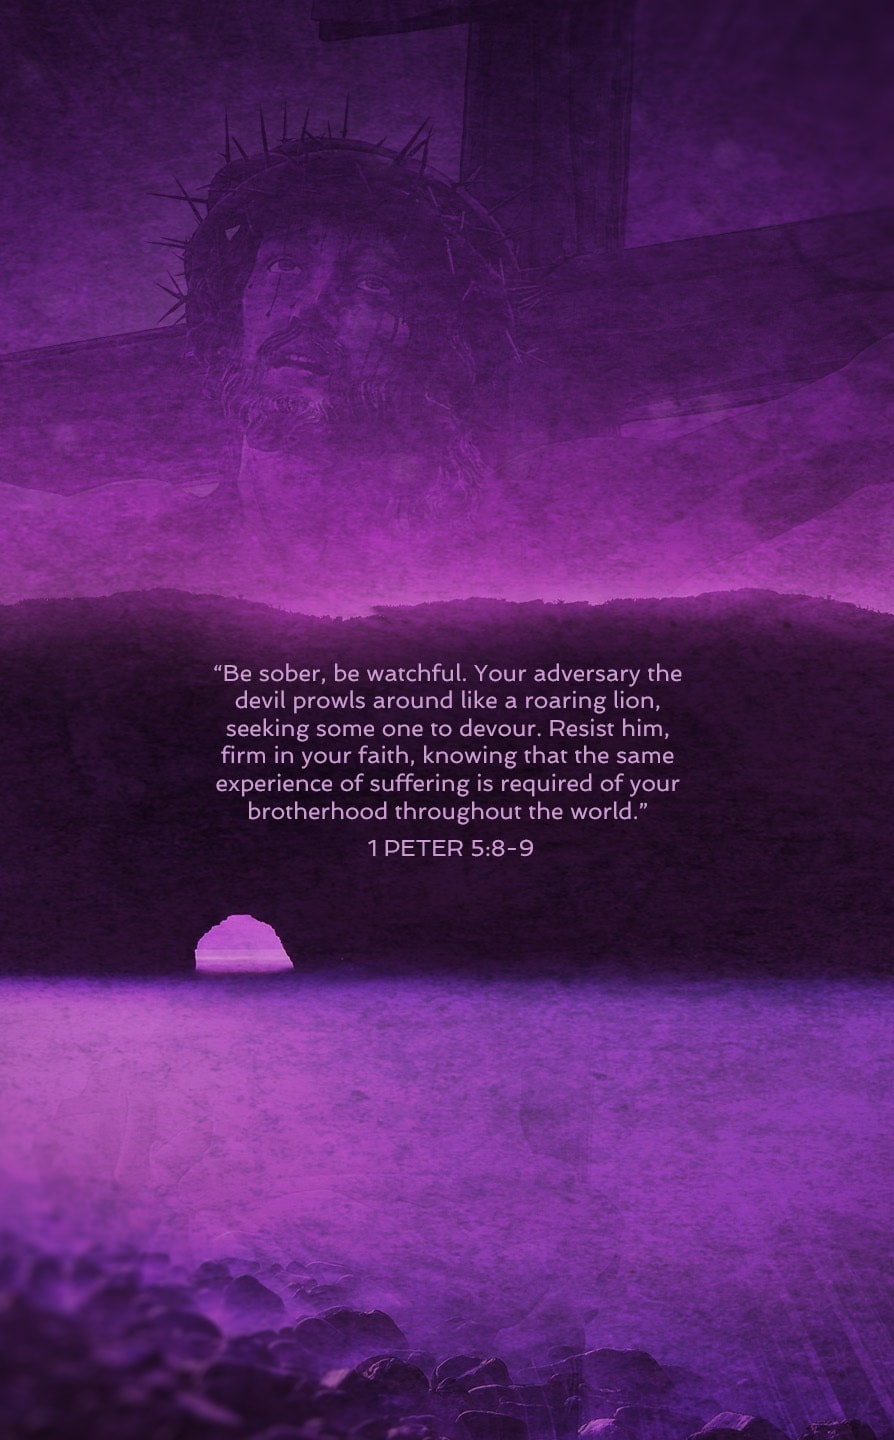 16 Quotes to Inspire Your Lent as Free HD Catholic Wallpapers